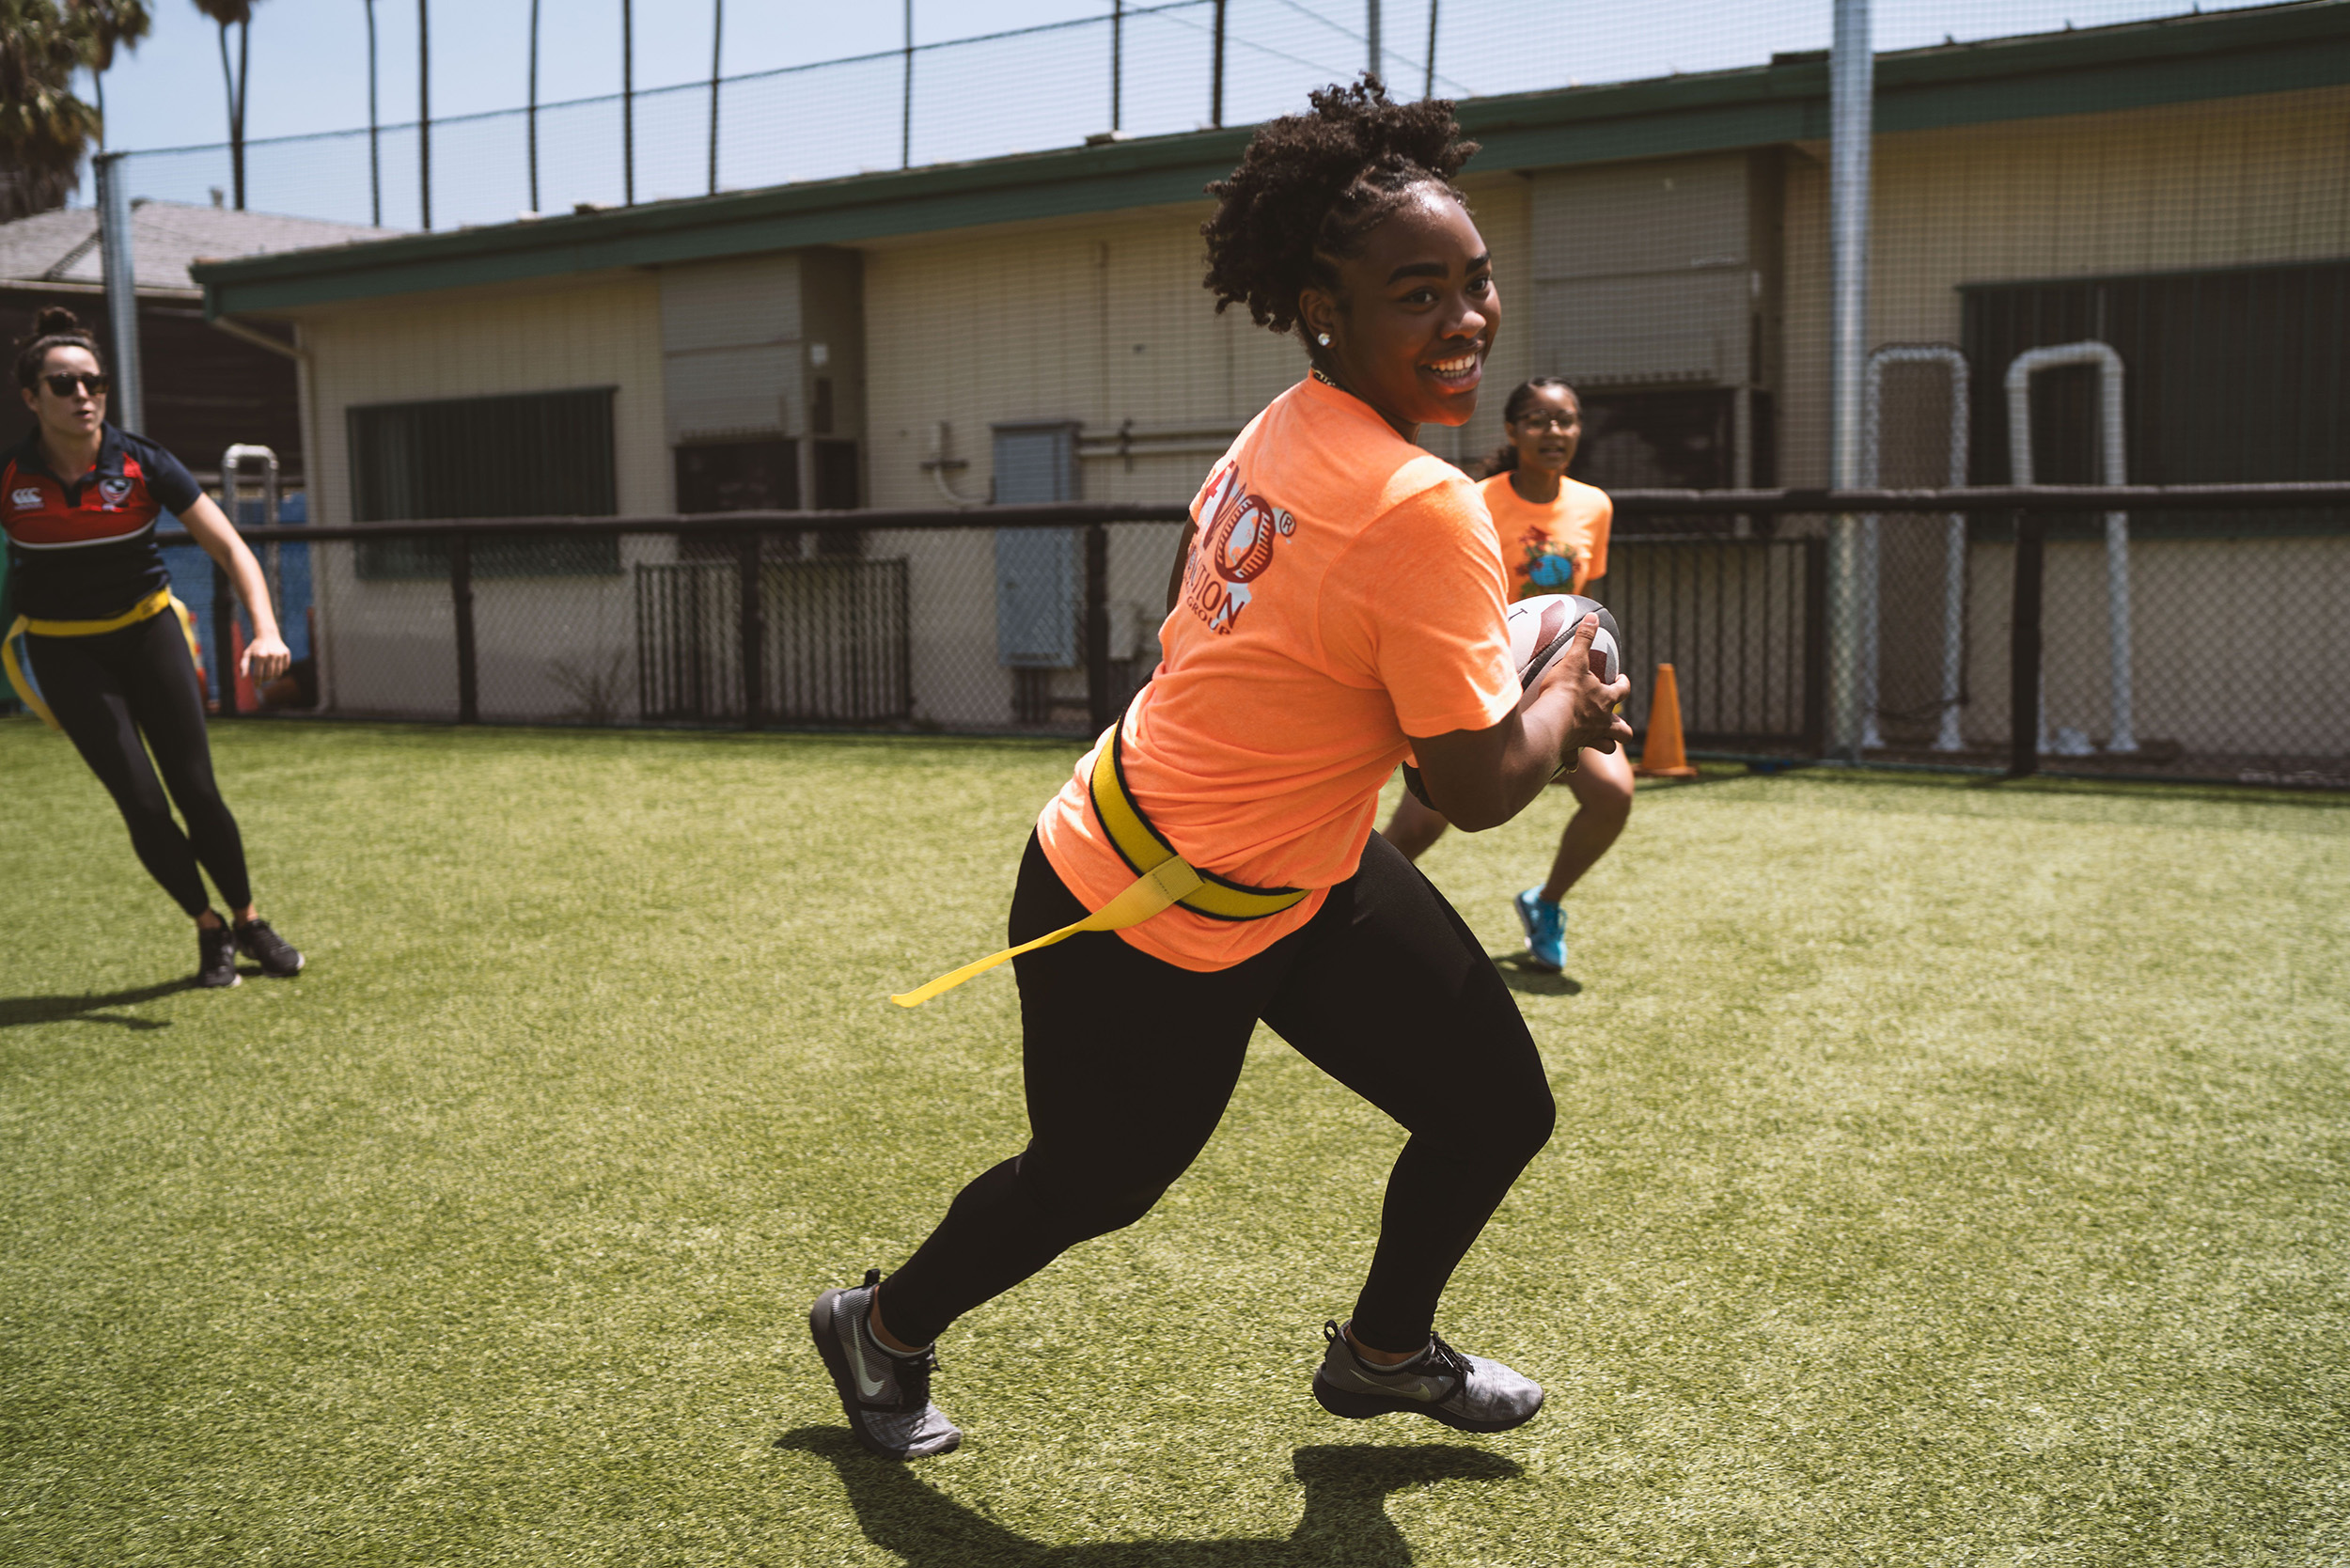 The Power of She Fund - Women's Sports Foundation